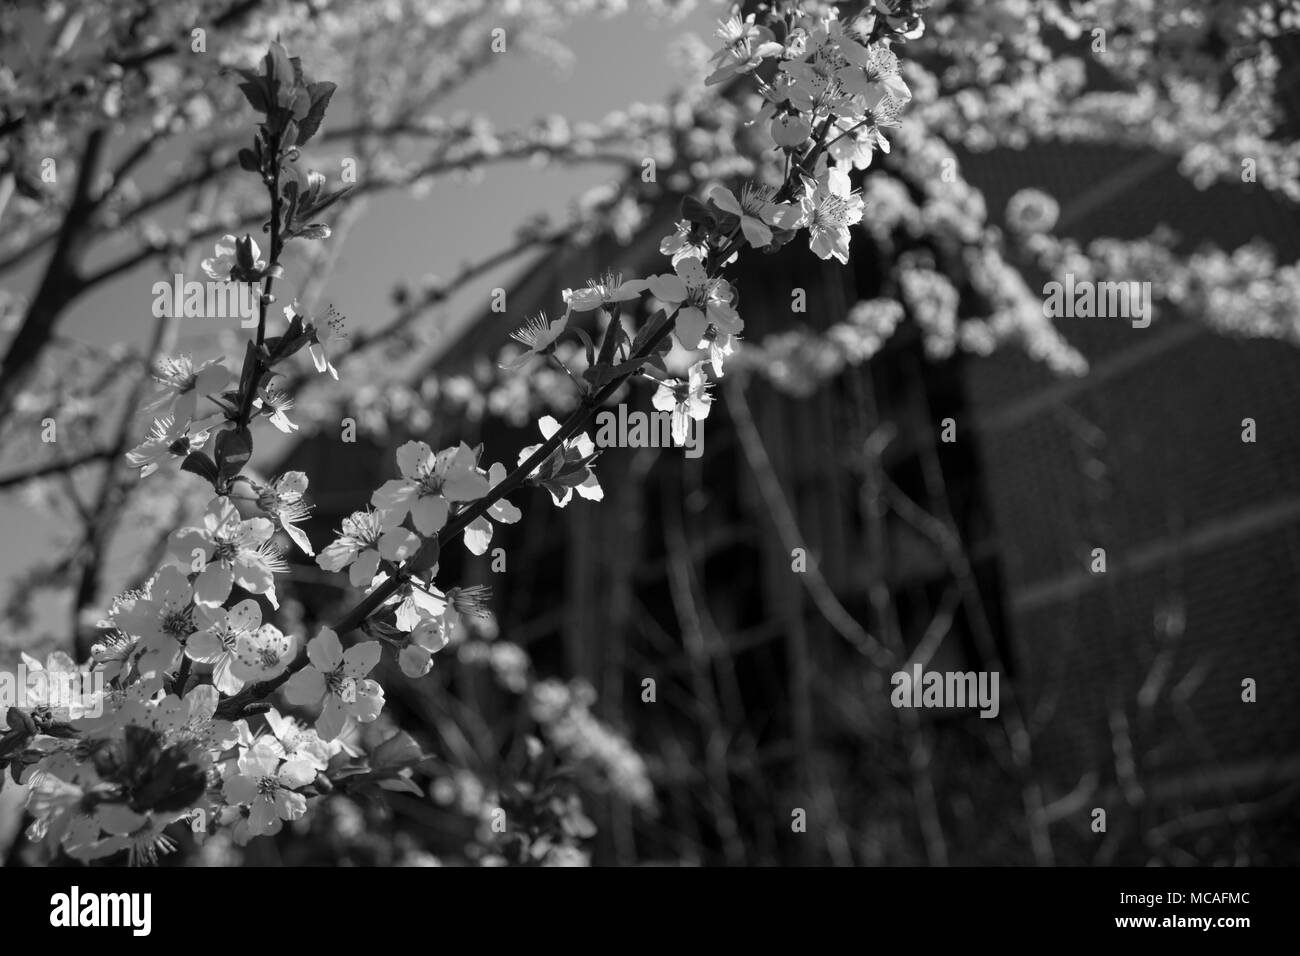 Forest background blur Black and White Stock Photos & Images - Alamy